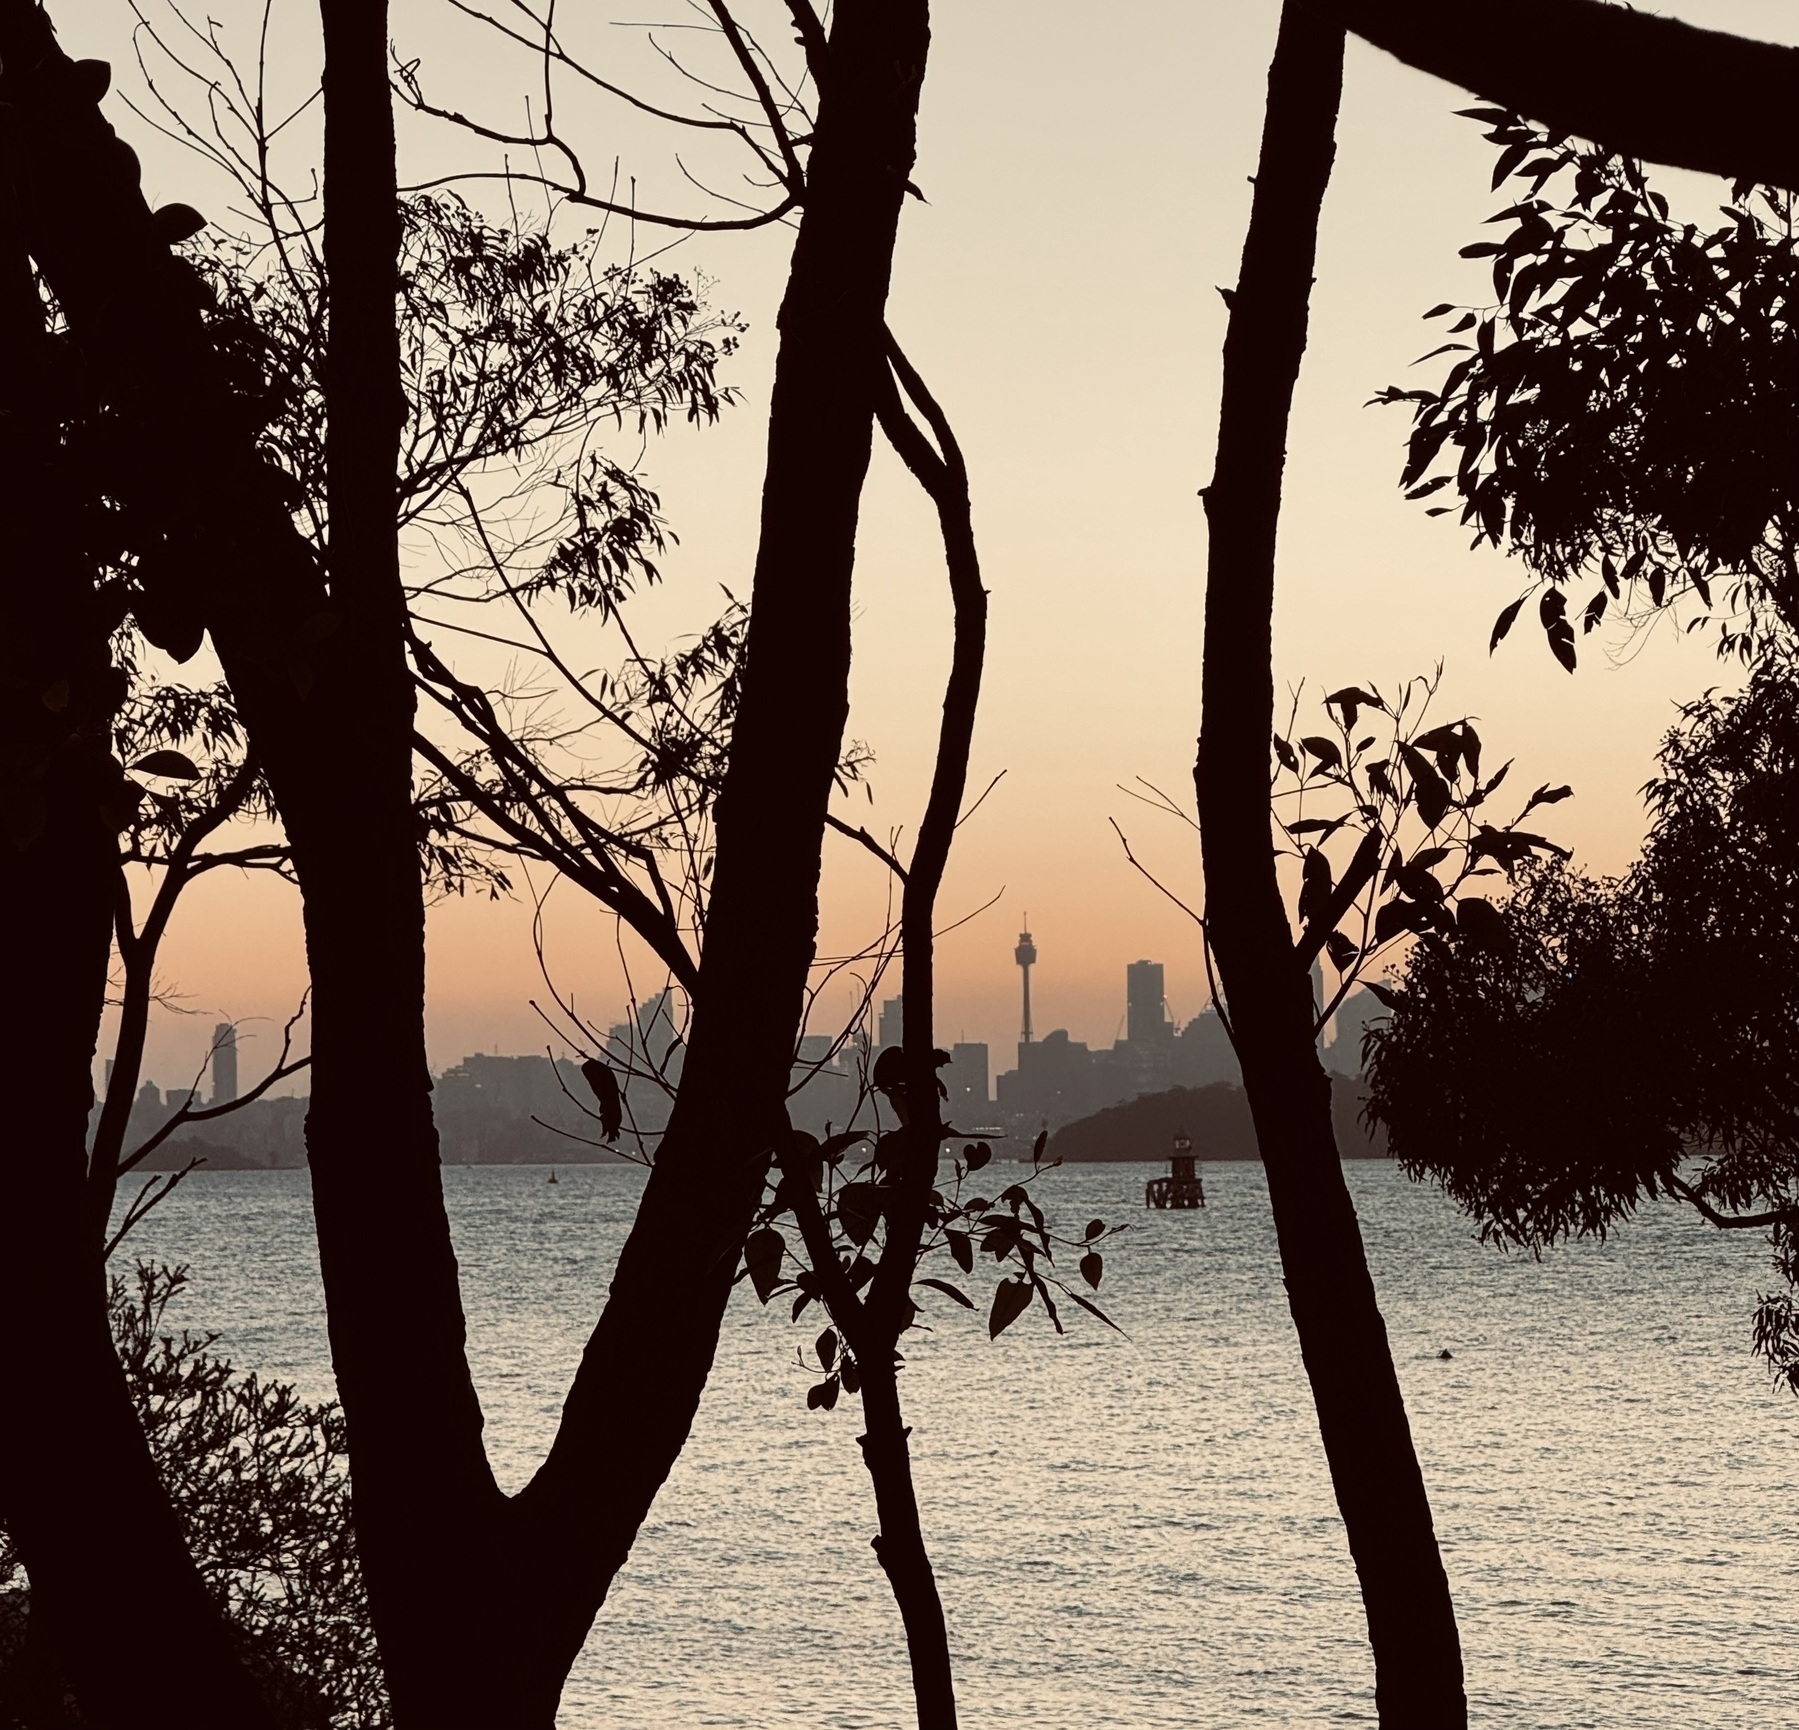 A view of the Sydney skyline at sunset, through silhouetted tree branches.